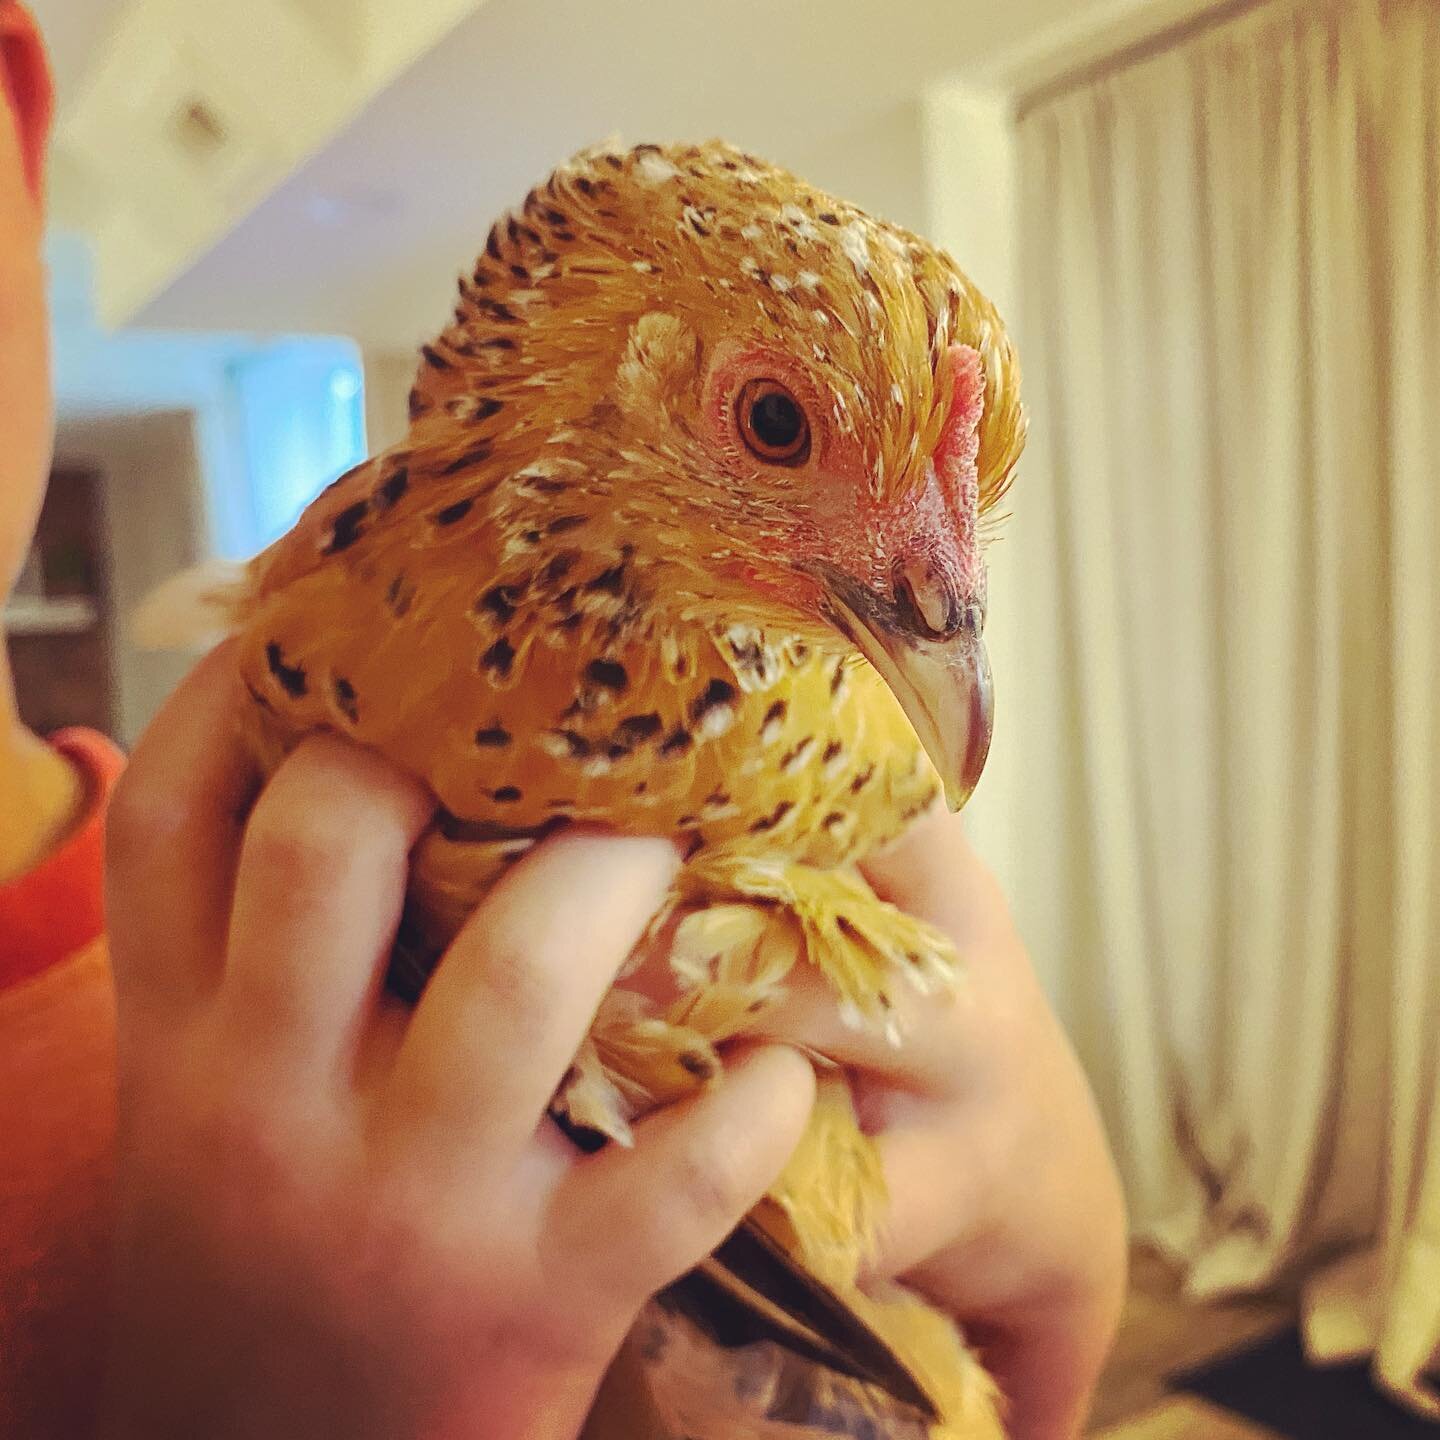 You&rsquo;ve heard of therapy dogs, but what about a therapy chicken? 🤔😍🐓

This is Fancy Pants, she is a beautiful feather-footed chicken, and no, she won&rsquo;t be greeting you in my office, but I dream of someday opening a nature-based therapy 